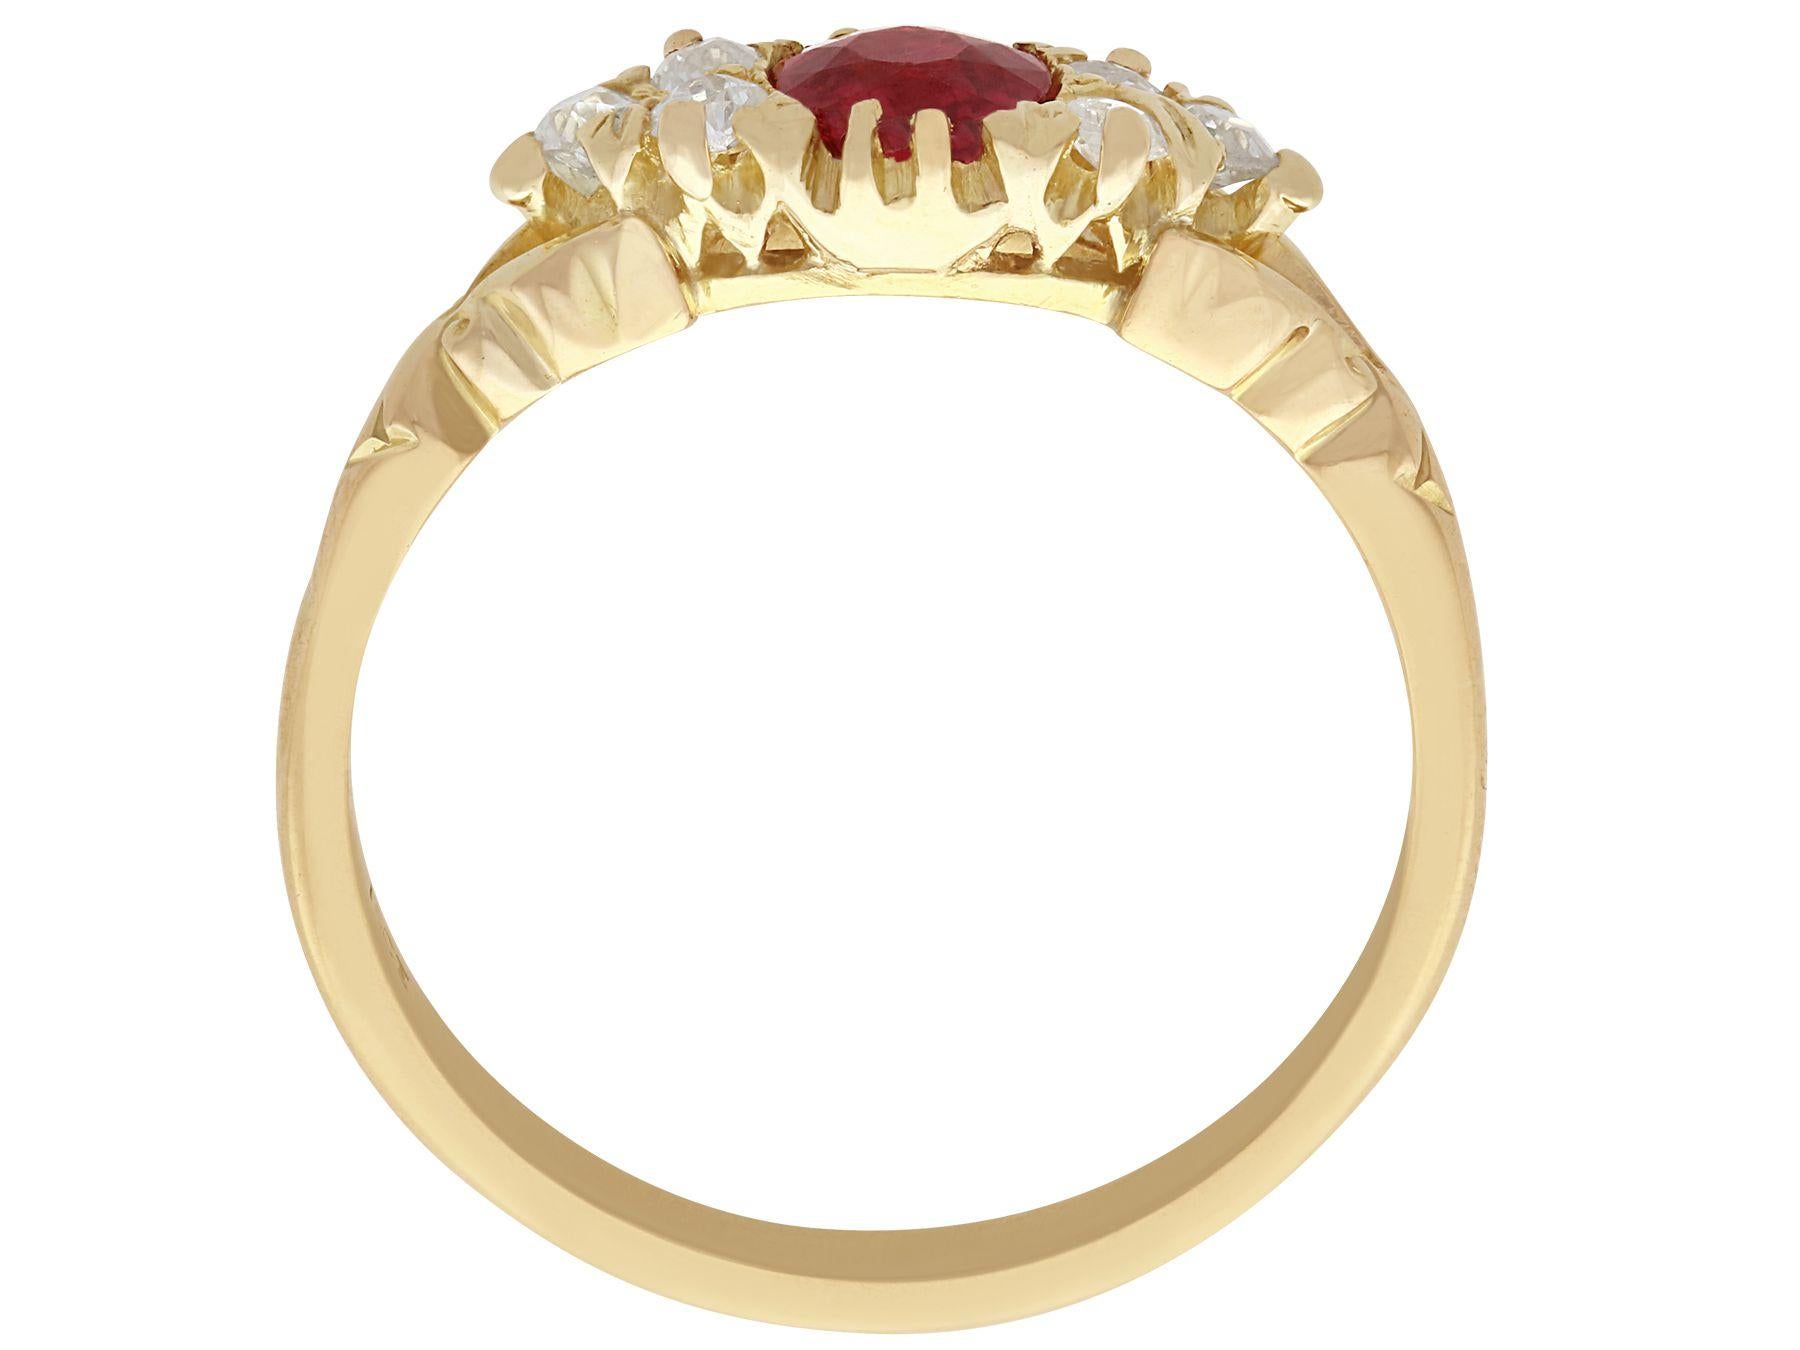 Women's Antique Ruby and Diamond Yellow Gold Cocktail Ring, circa 1910